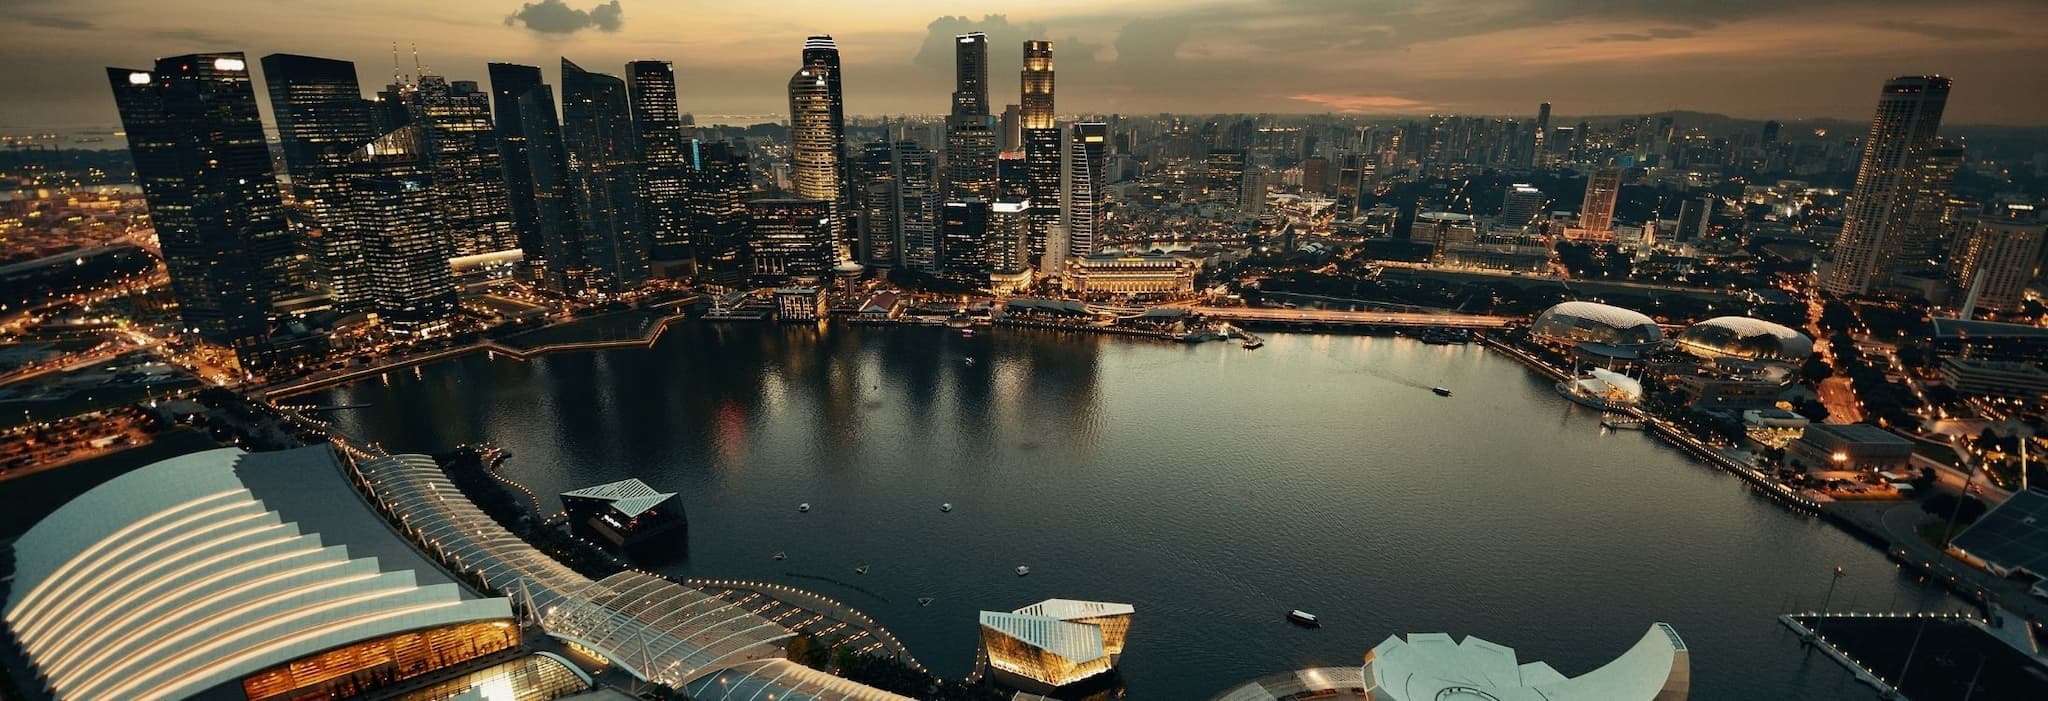 9 Things you DON'T want to do while in Singapore!